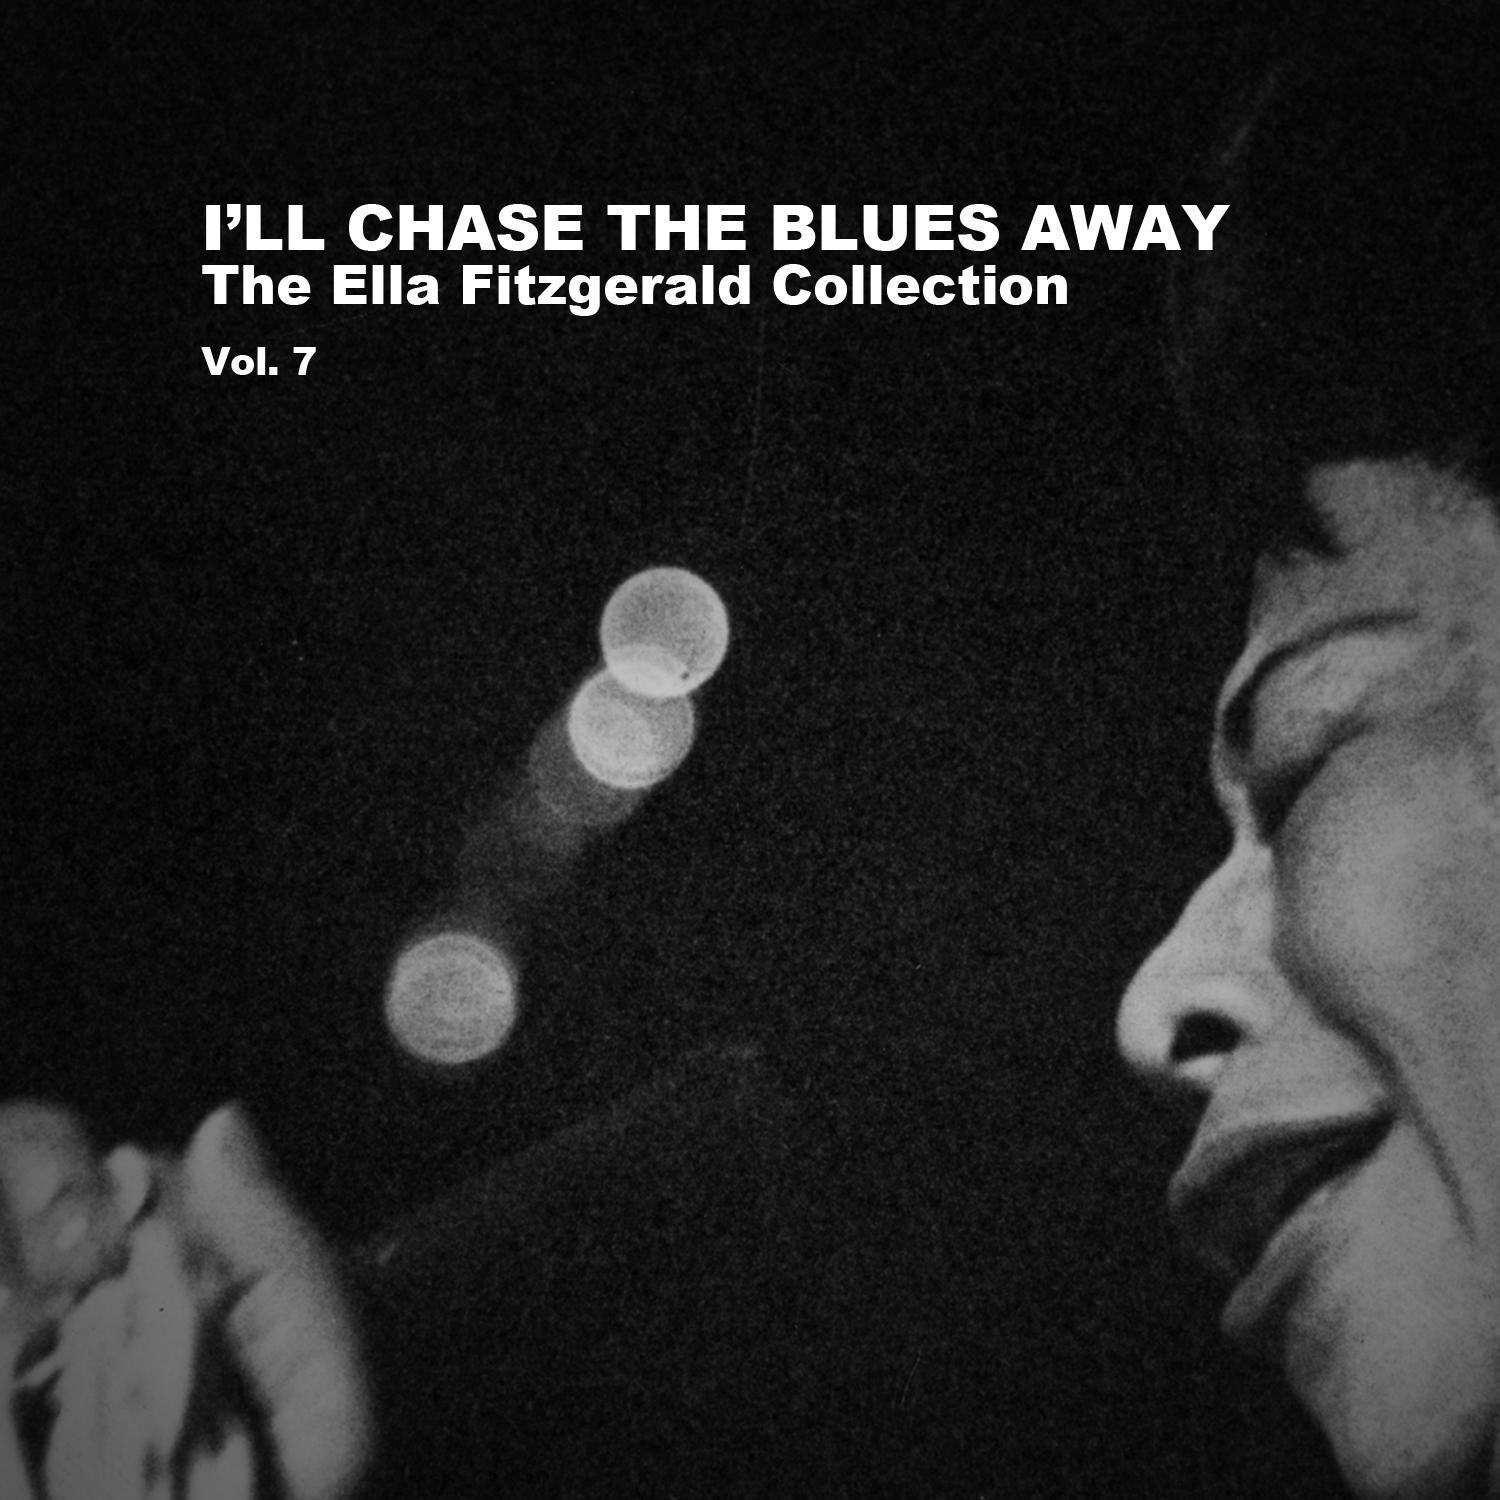 I'll Chase the Blues Away: The Ella Fitzgerald Collection, Vol. 7